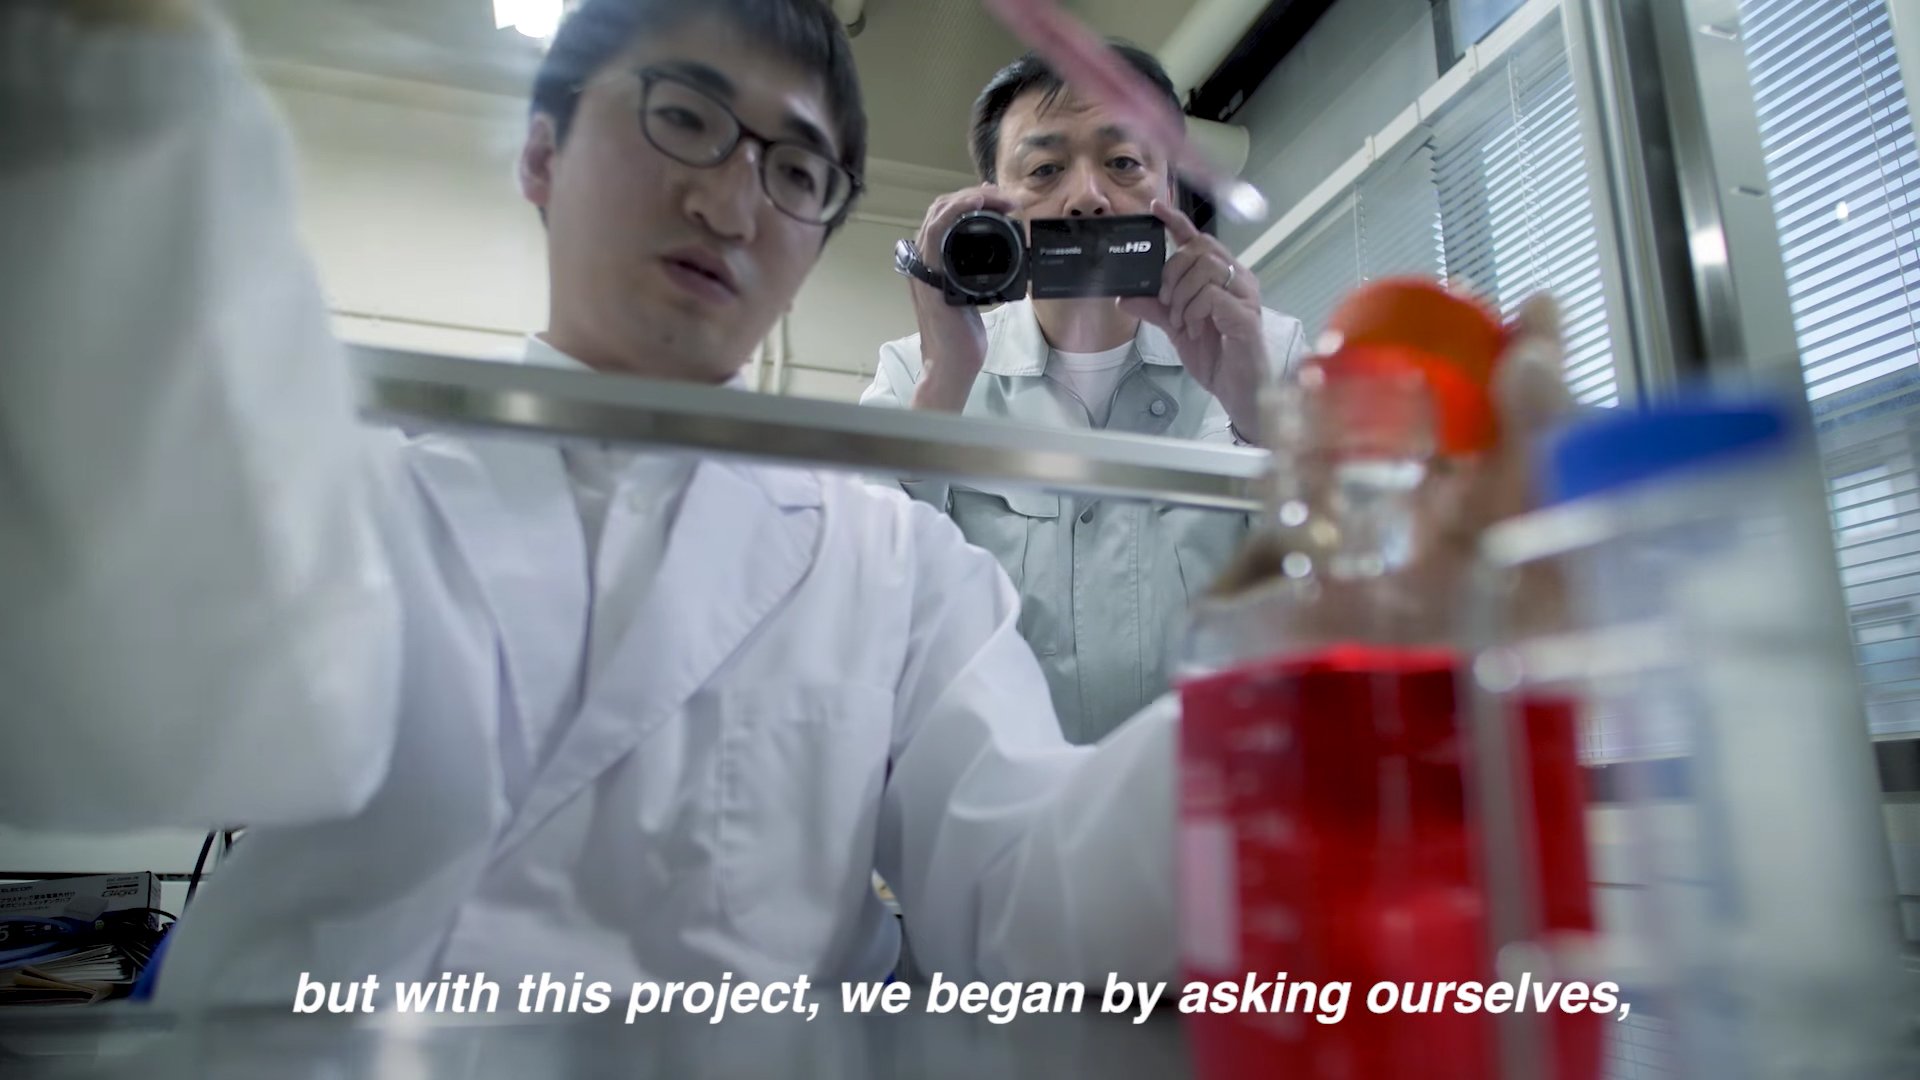 A screenshot from the video 'iPS Cells Automated Culture System'